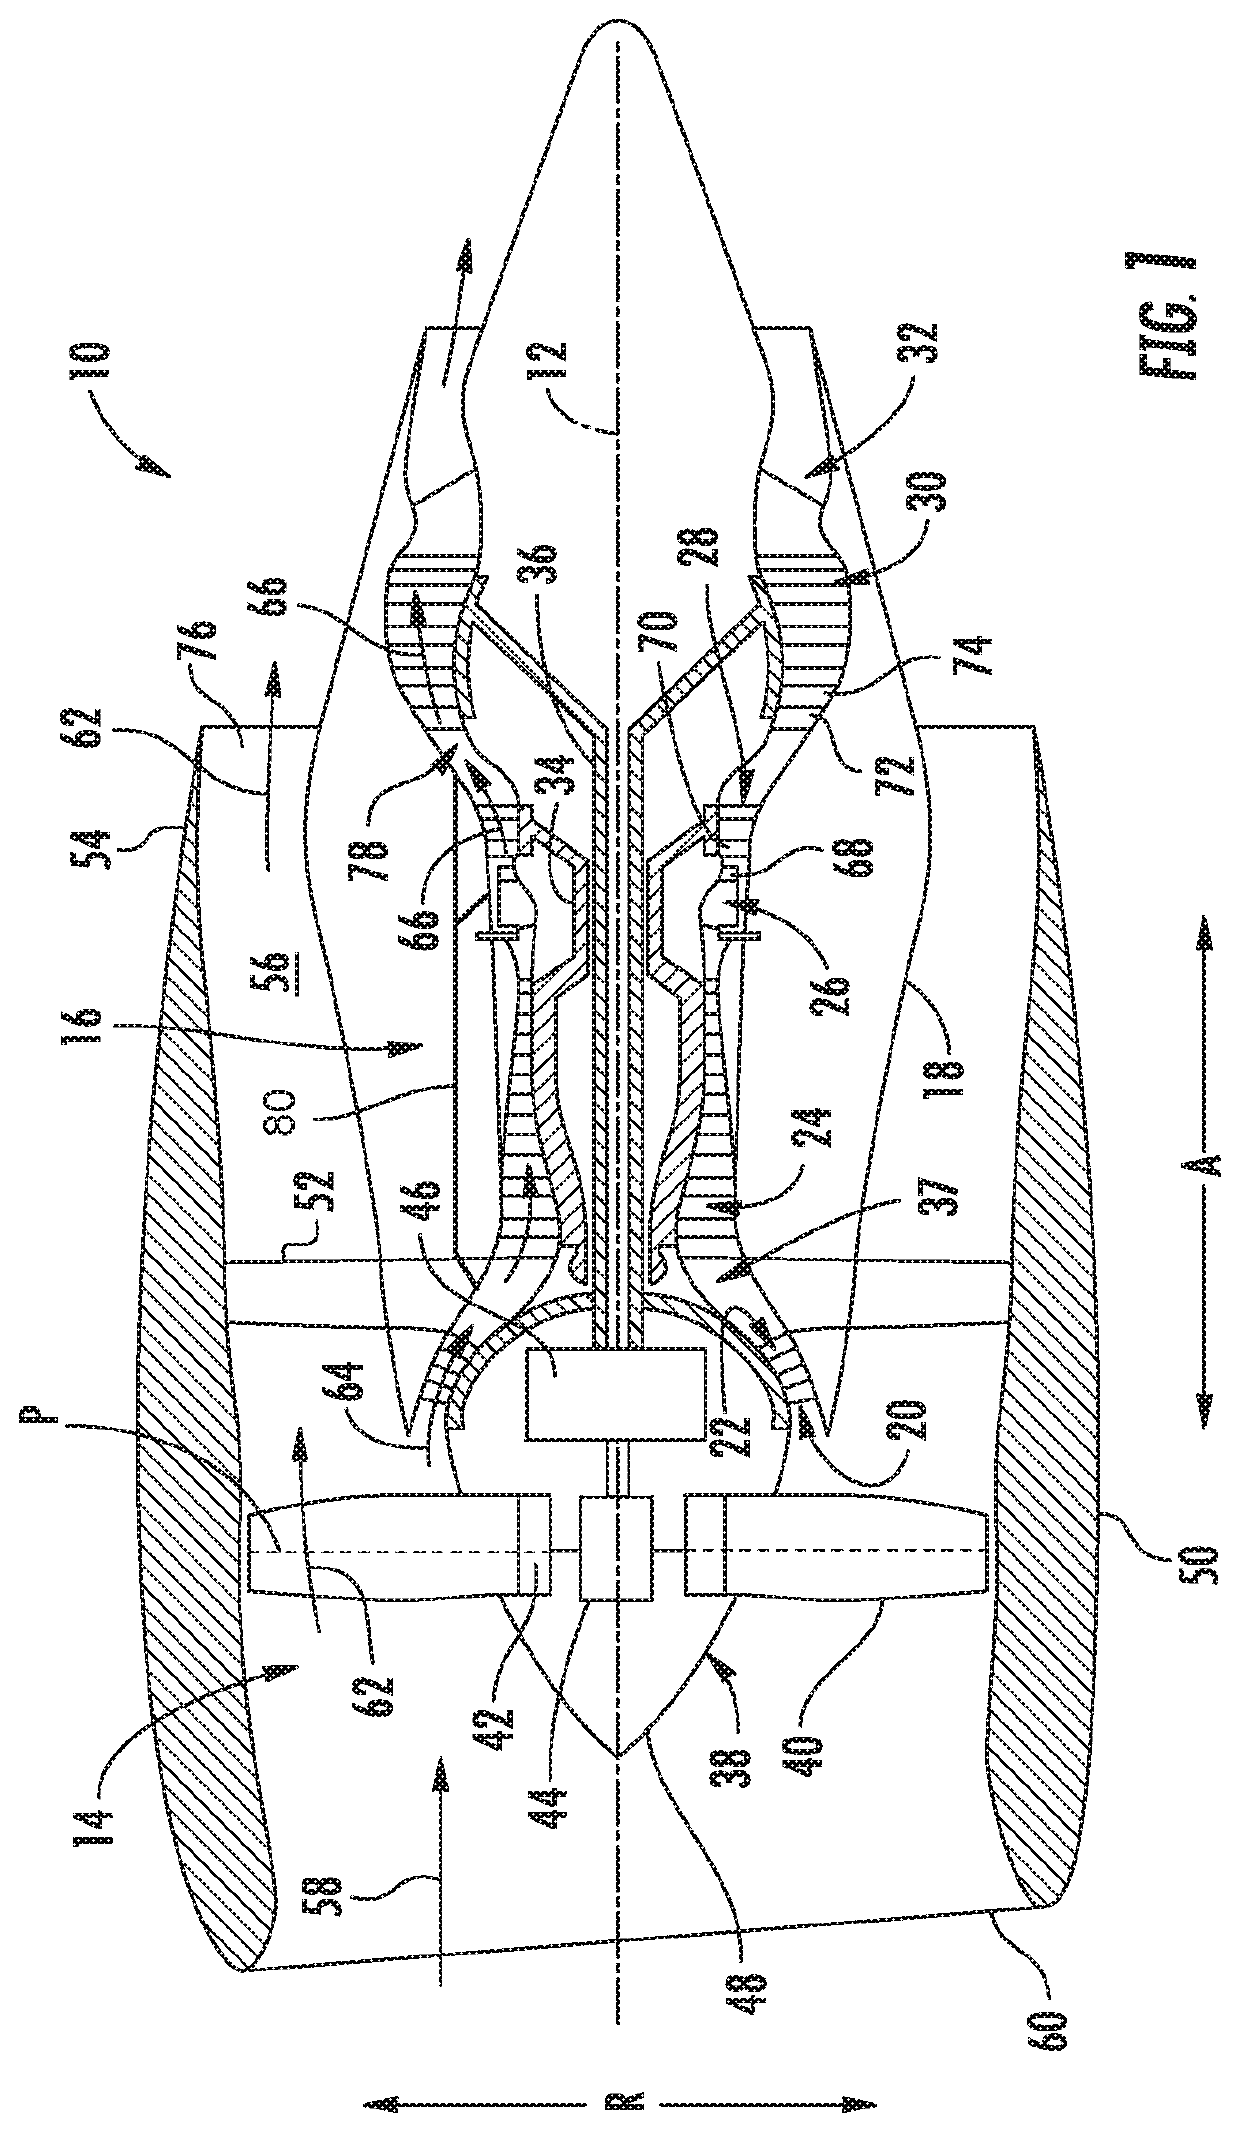 Hybrid propulsion system for a gas turbine engine including a fuel cell